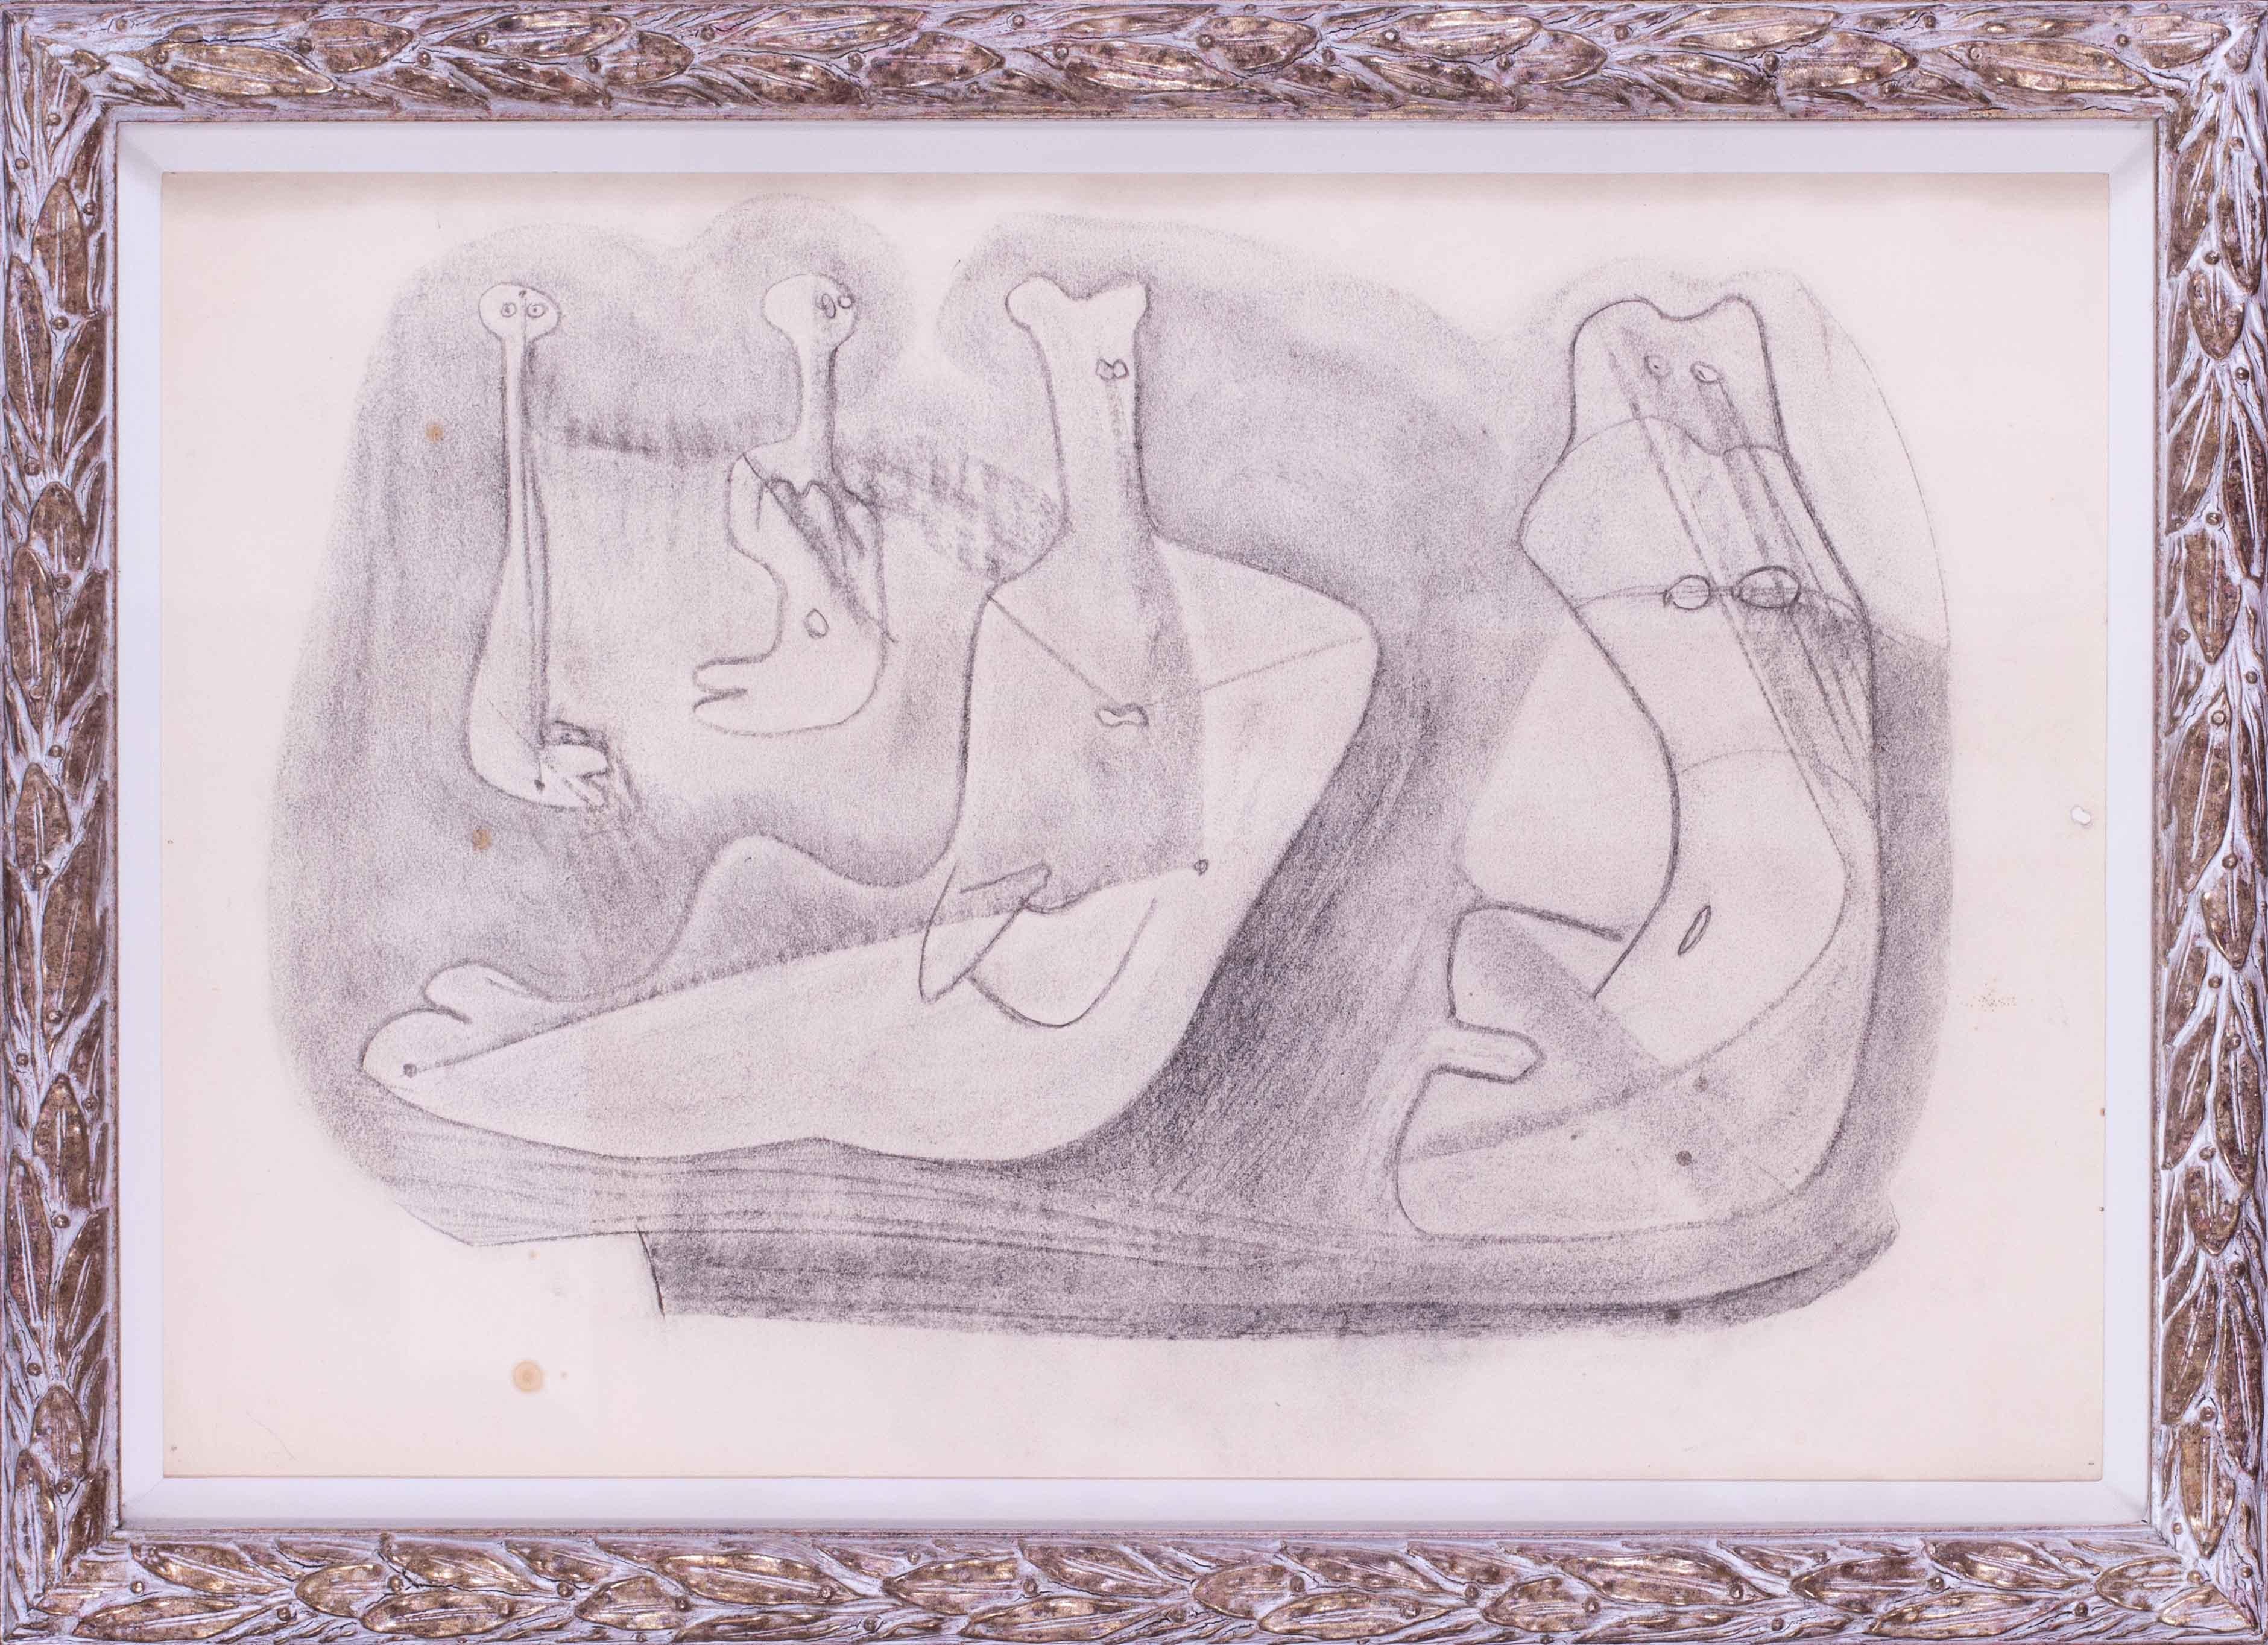 Arthur Berridge (British, 1902-1957) 
Abstracted figures #1 1950 
Charcoal 
14.1/2 x 21.1/2 in. (36.8 x 54.7 cm.) 
Provenance: David Lay, Penzance 

Born in Leicester in 1902, Berridge attended Goldsmith's College in London, where he graduated in